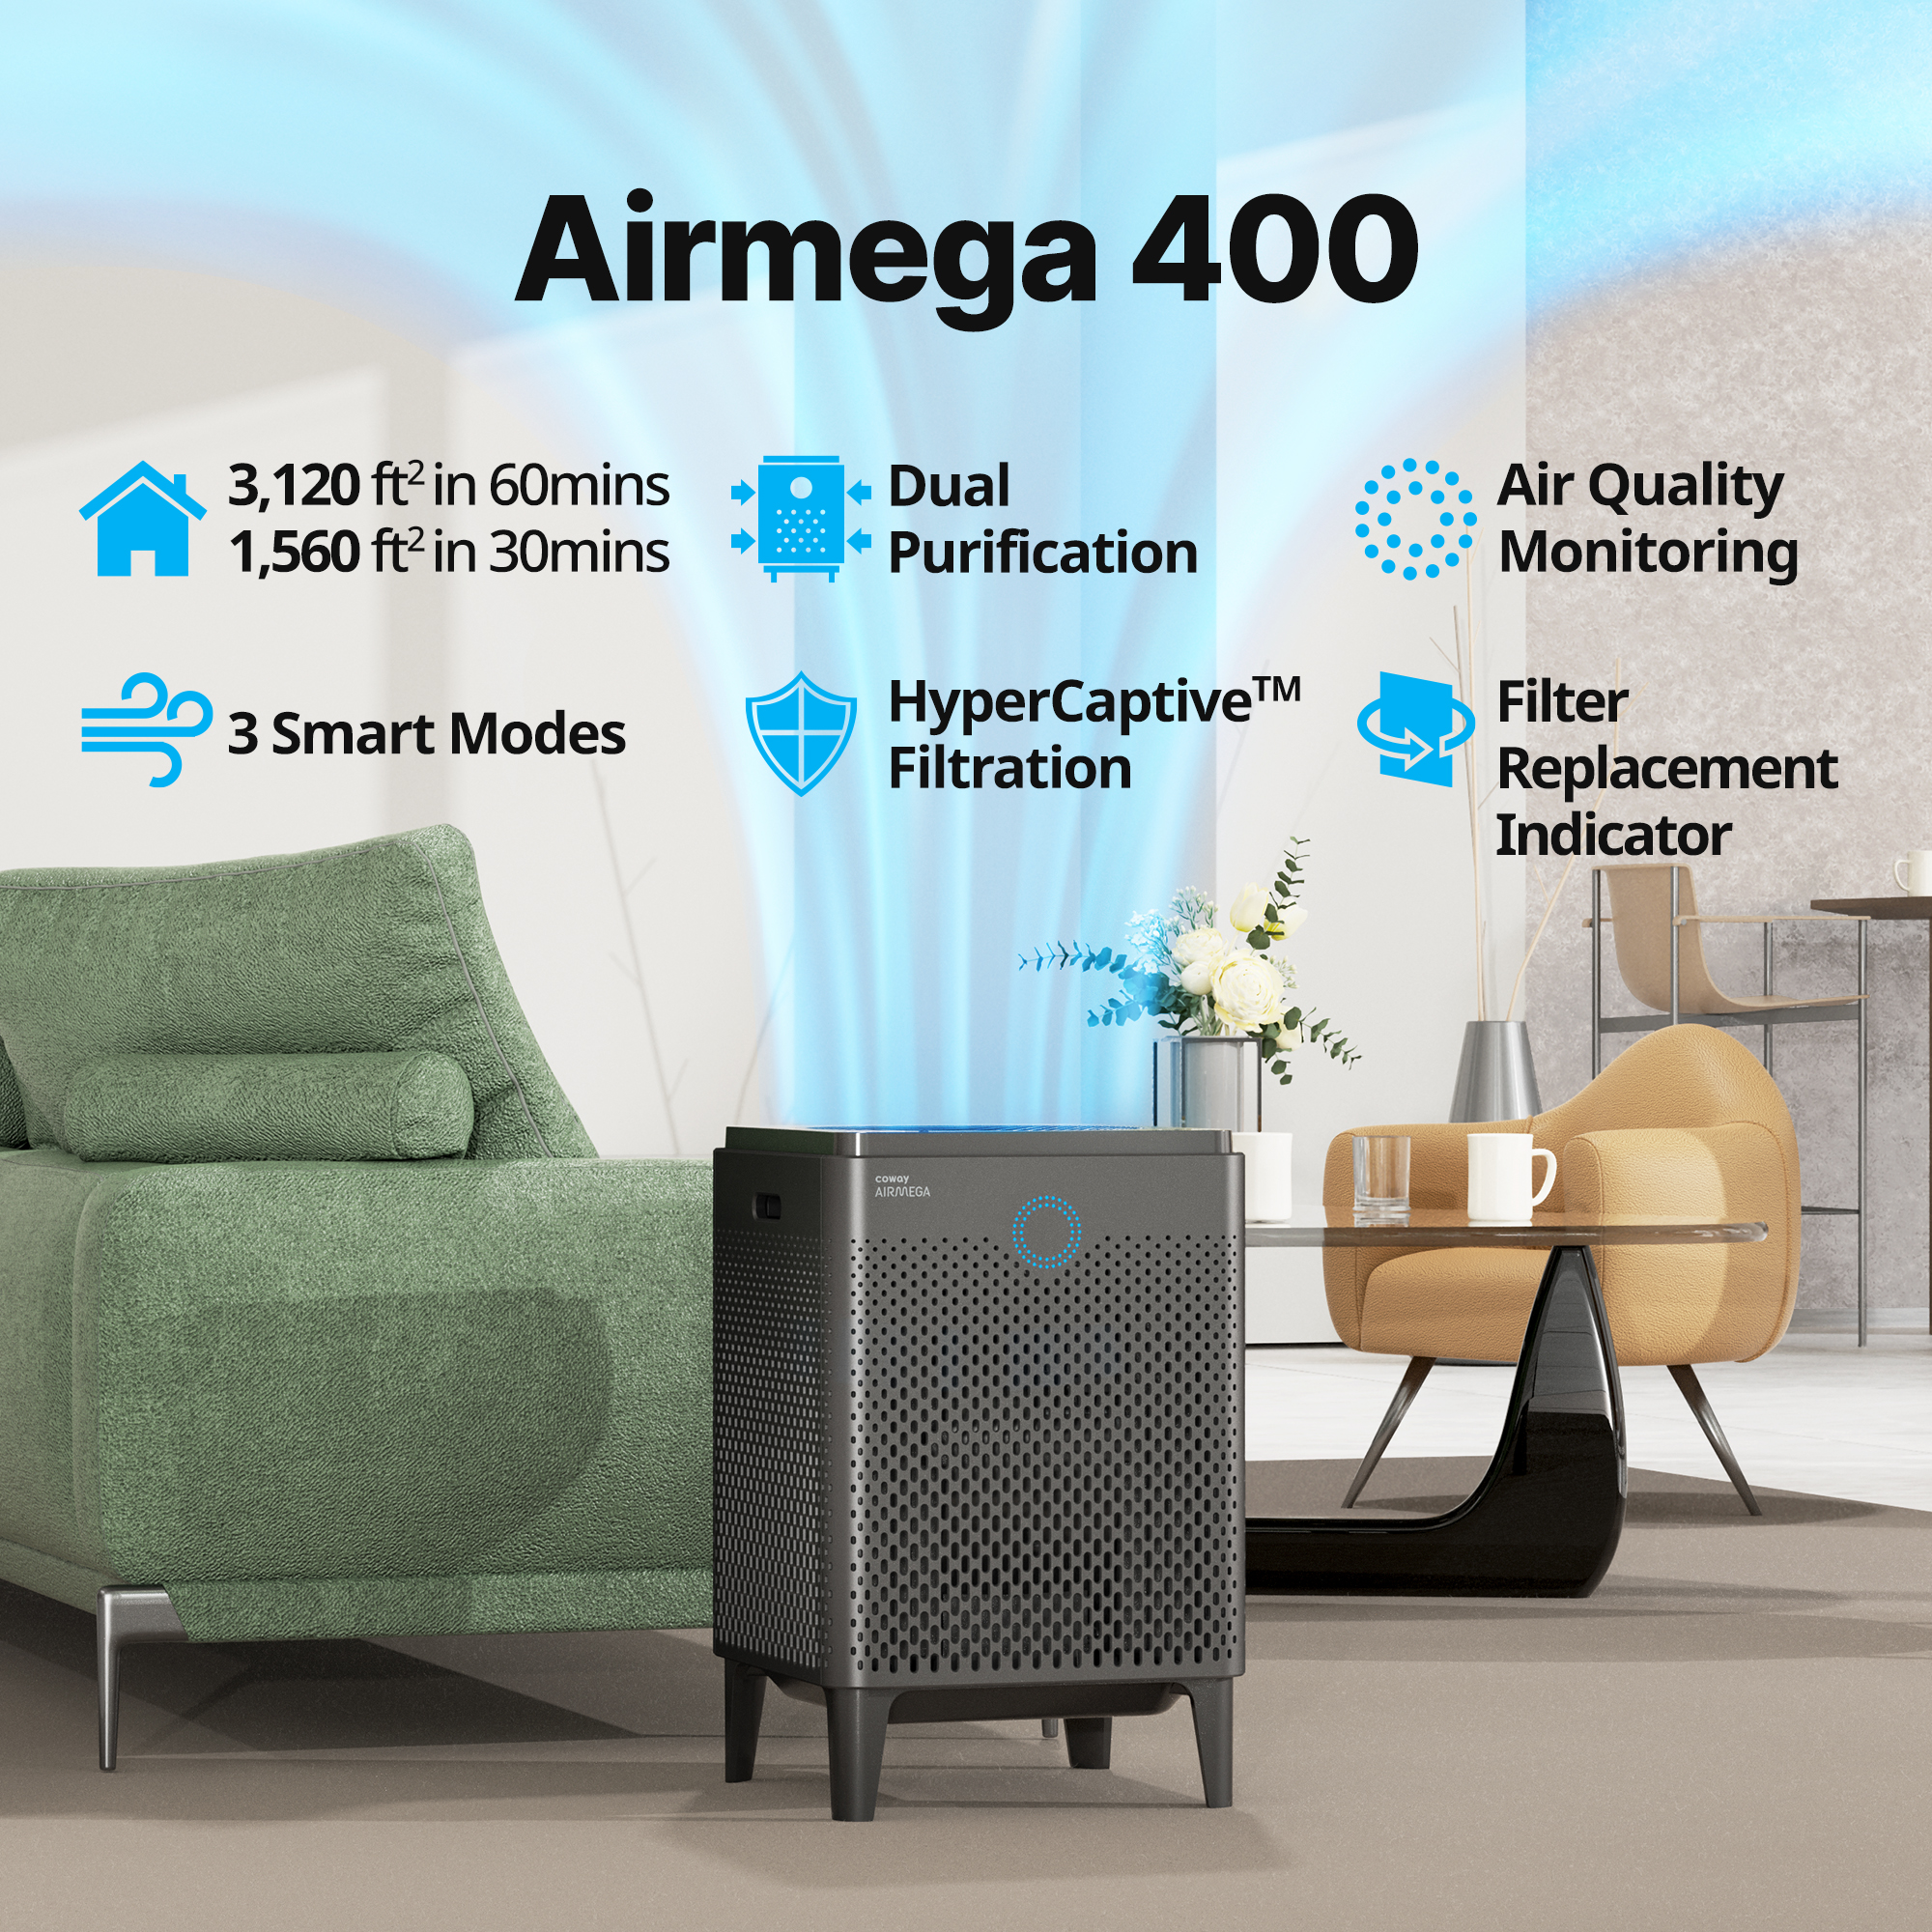 Coway Air Purifier Airmega 400 Graphite True HEPA Air Purifier with 1560 sq ft Coverage, Auto, Eco, & Sleep Mode, Air Quality & Filter Replacement Indicator - image 2 of 7